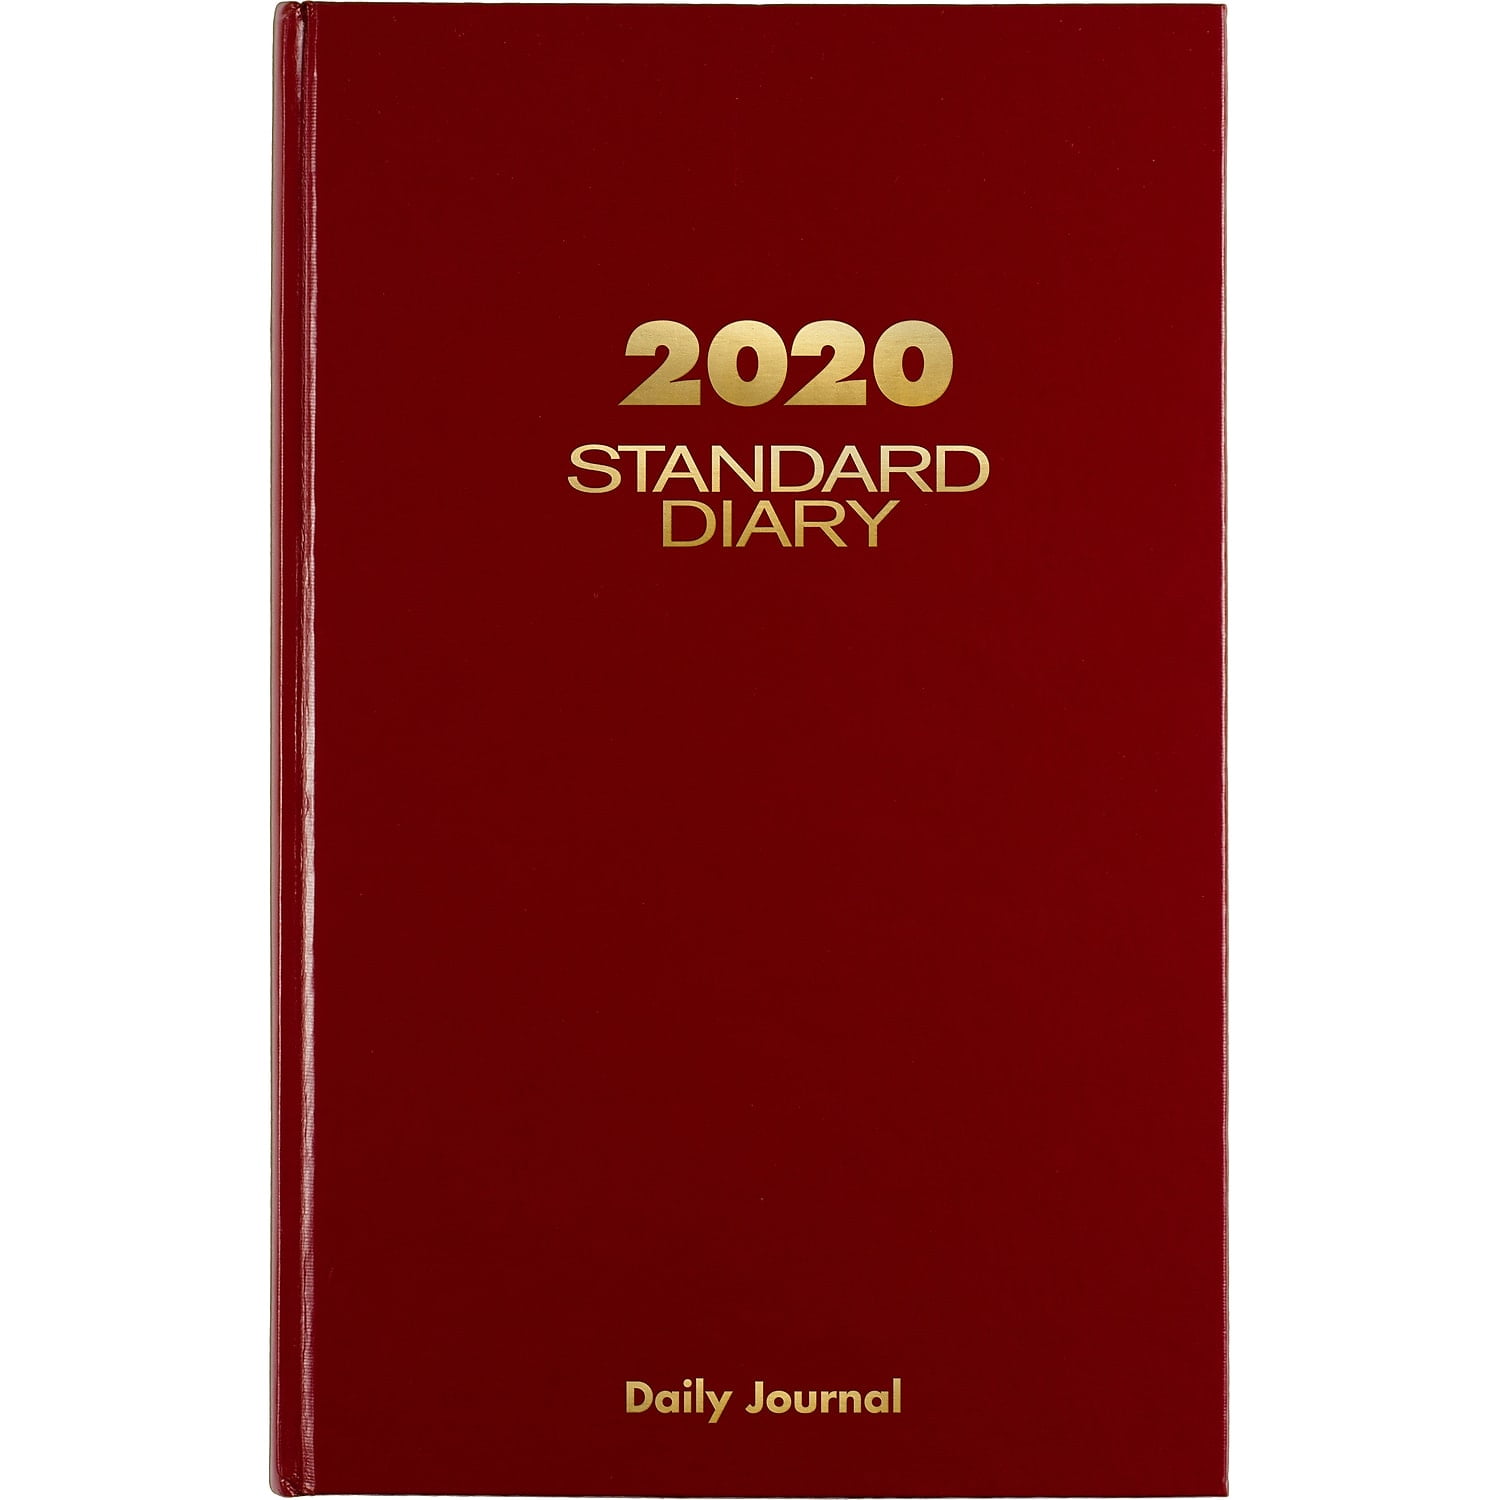 SD3771321 2021 Diary/Address Book by AT-A-GLANCE Large 7-3/4 x 12 Standard Daily Diary & Address Book Red 